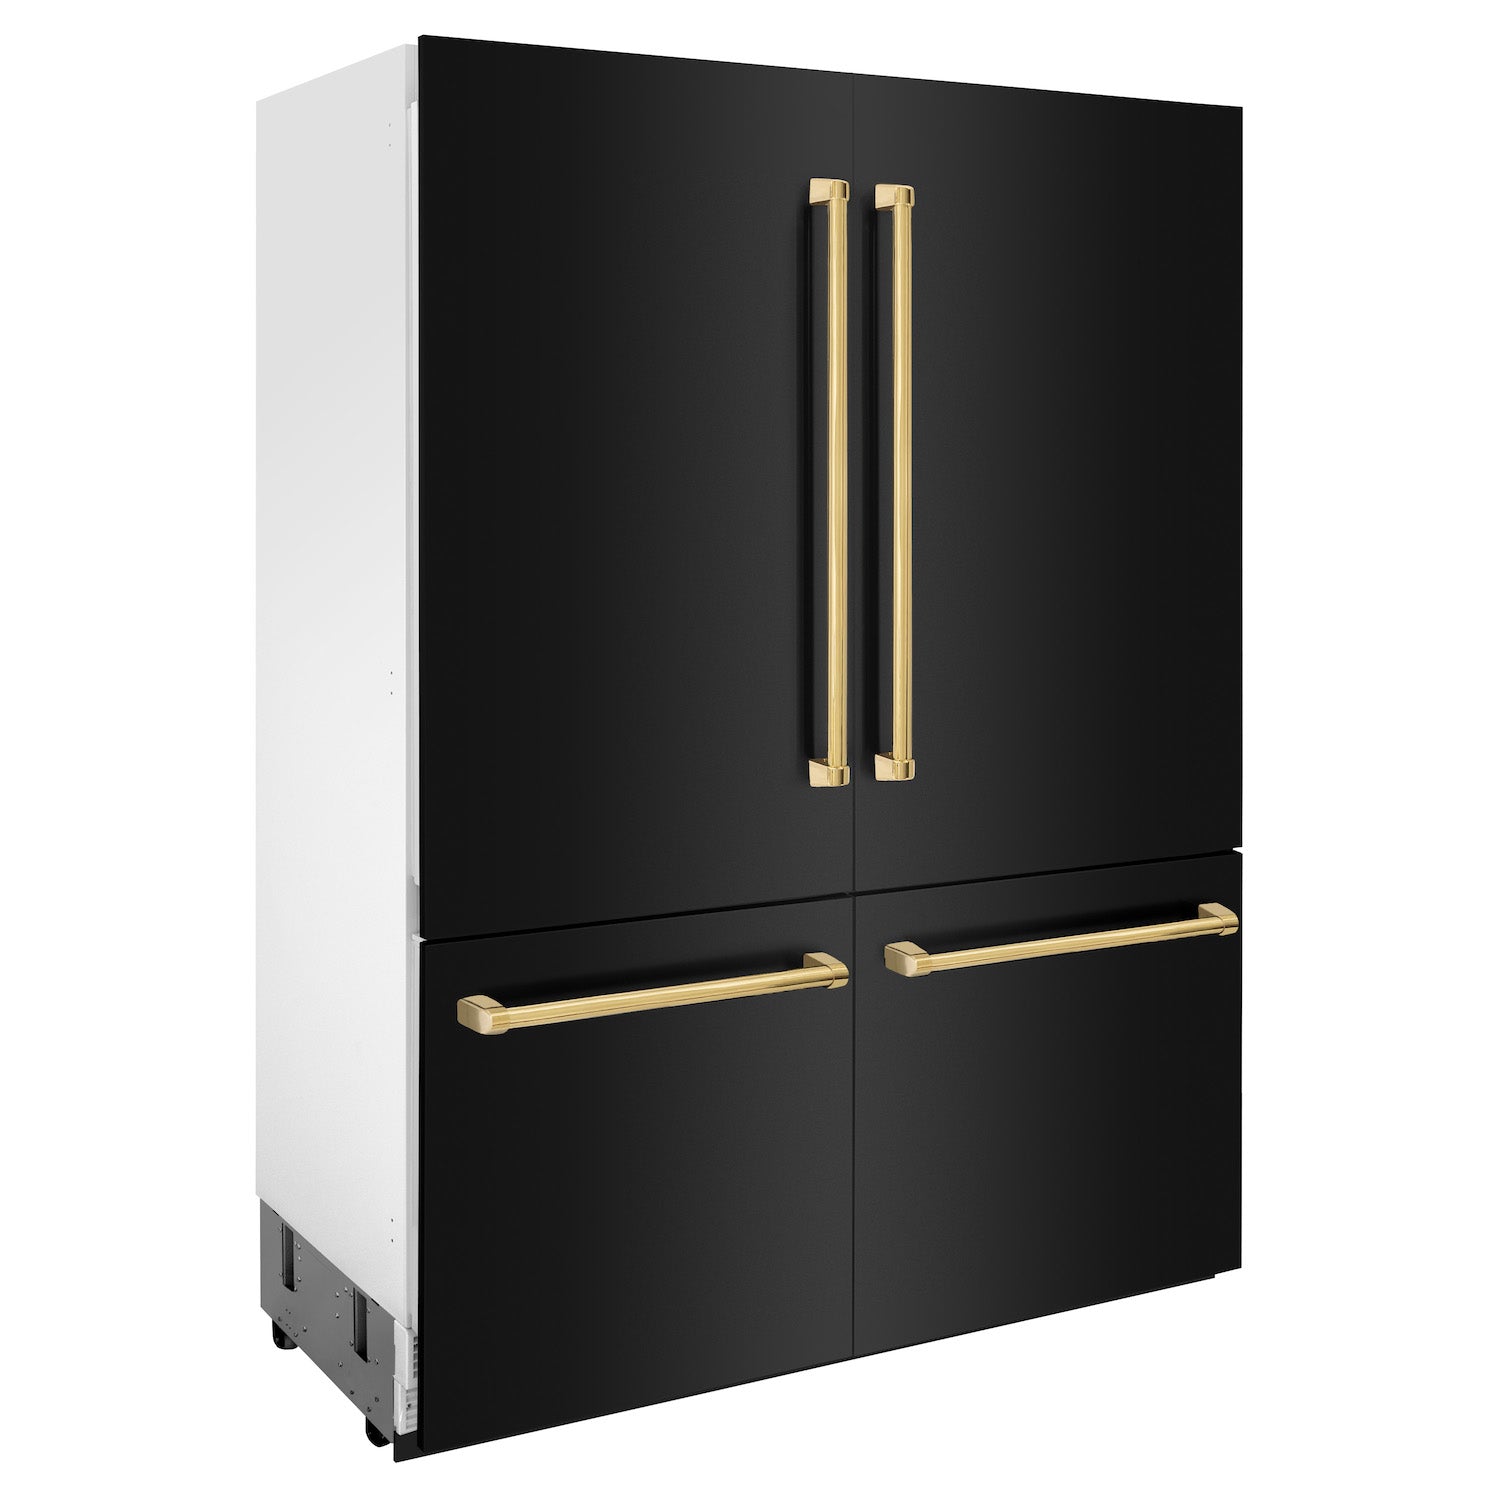 ZLINE Autograph Edition 60 in. 32.2 cu. ft. Built-in 4-Door French Door Refrigerator with Internal Water and Ice Dispenser in Black Stainless Steel with Polished Gold Accents (RBIVZ-BS-60-G) side, closed.